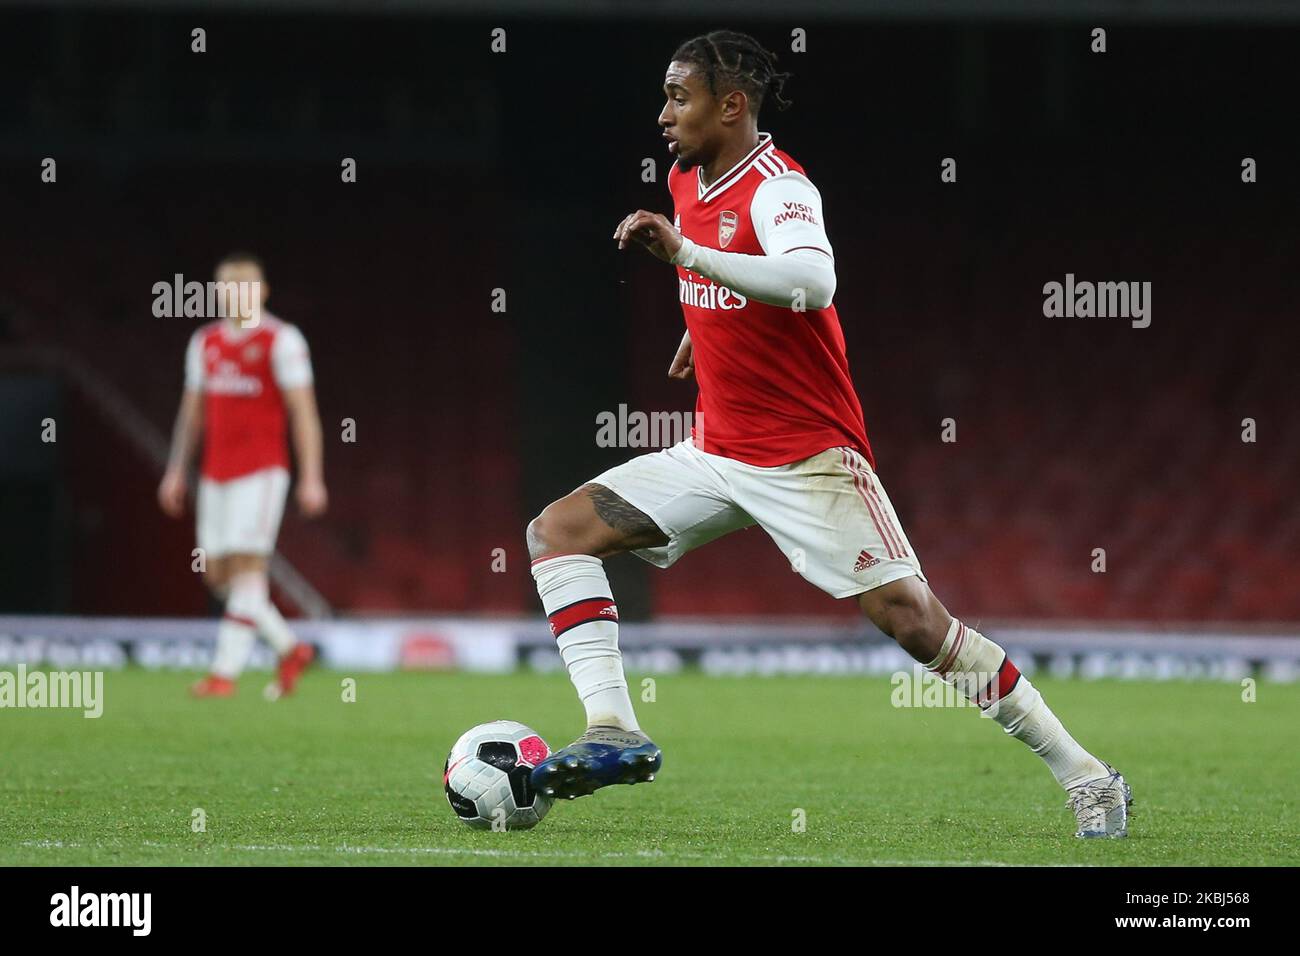 Reiss Nelson of Arsenal u23 in action during the Premier League 2 match between Arsenal Under 23 and Manchester City Under 23 at the Emirates Stadium, London on Saturday 29th February 2020. (Photo by Jacques Feeney/MINews/NurPhoto) Stock Photo